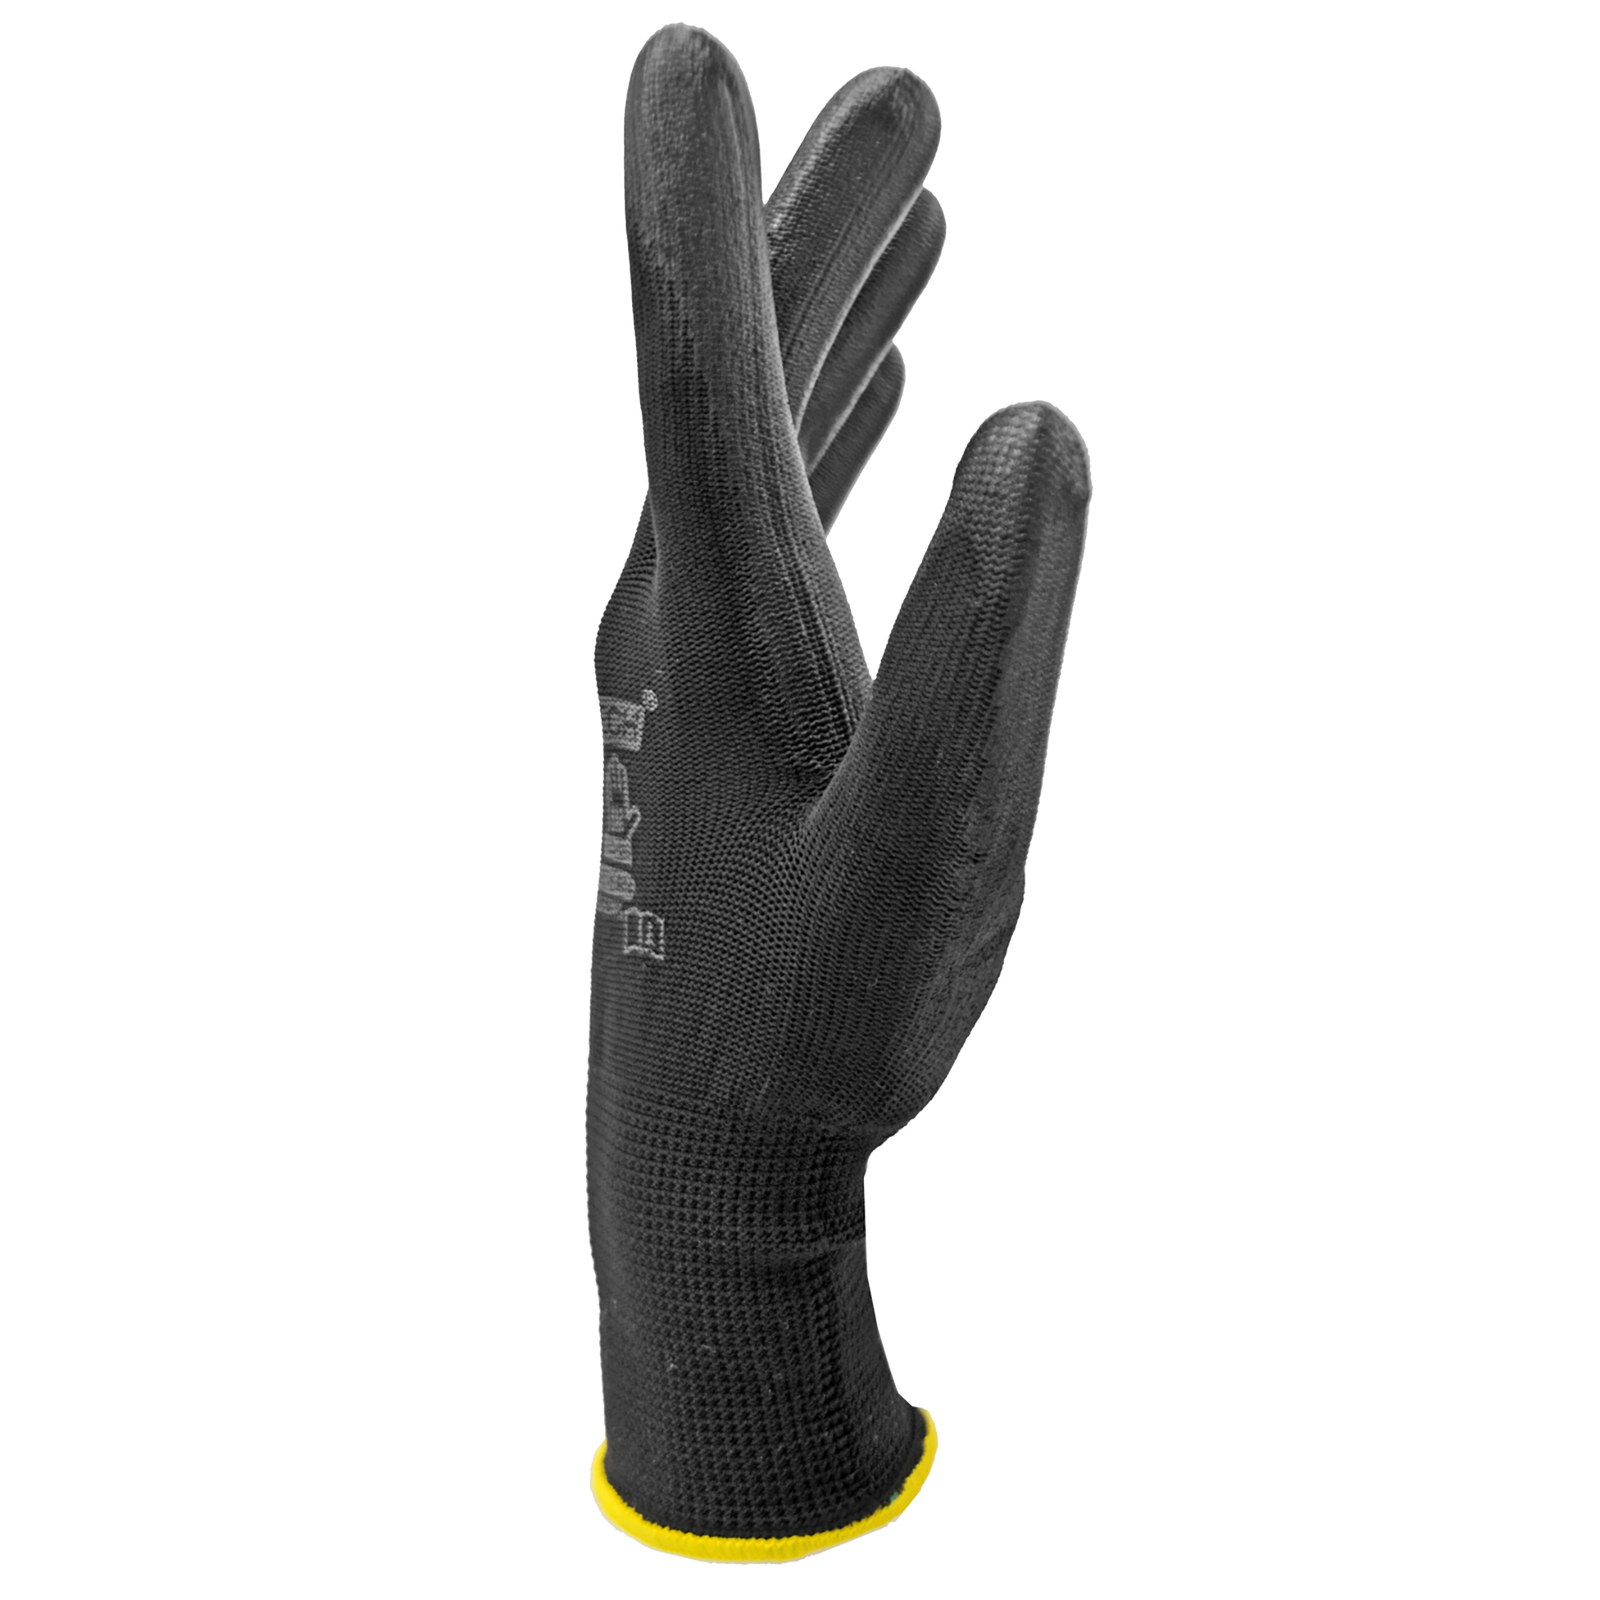 Cut Resistant Polyurethane Dipped Work Gloves | Technopack Safety & PPE XL by JORESTECH S-GD-02